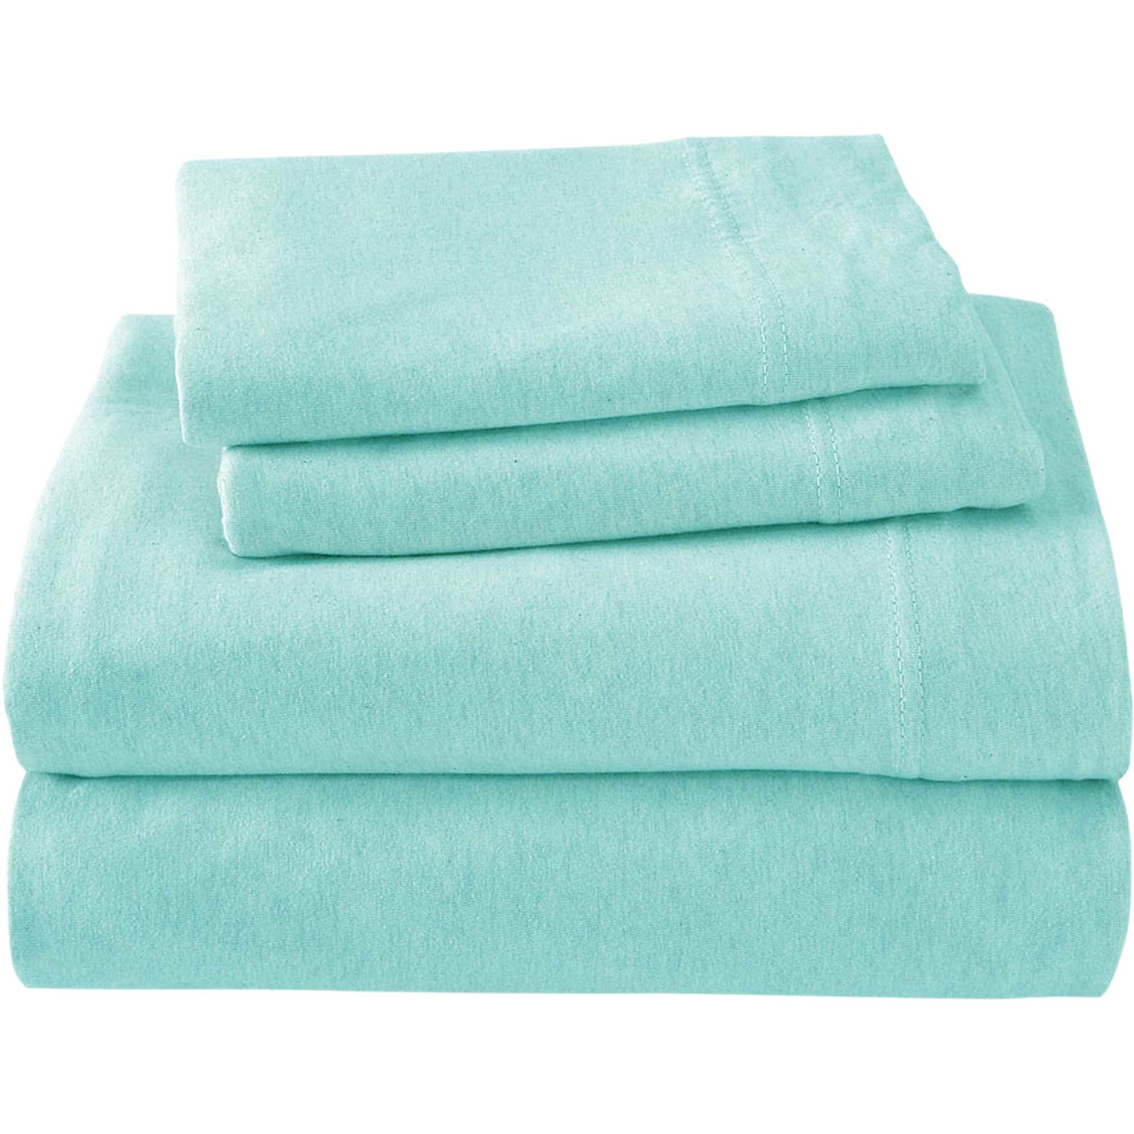 Royale Linens Soft Tees Luxury Cotton Modal Ultra Soft Jersey Knit Twin Sheet Set - Image 2 of 5